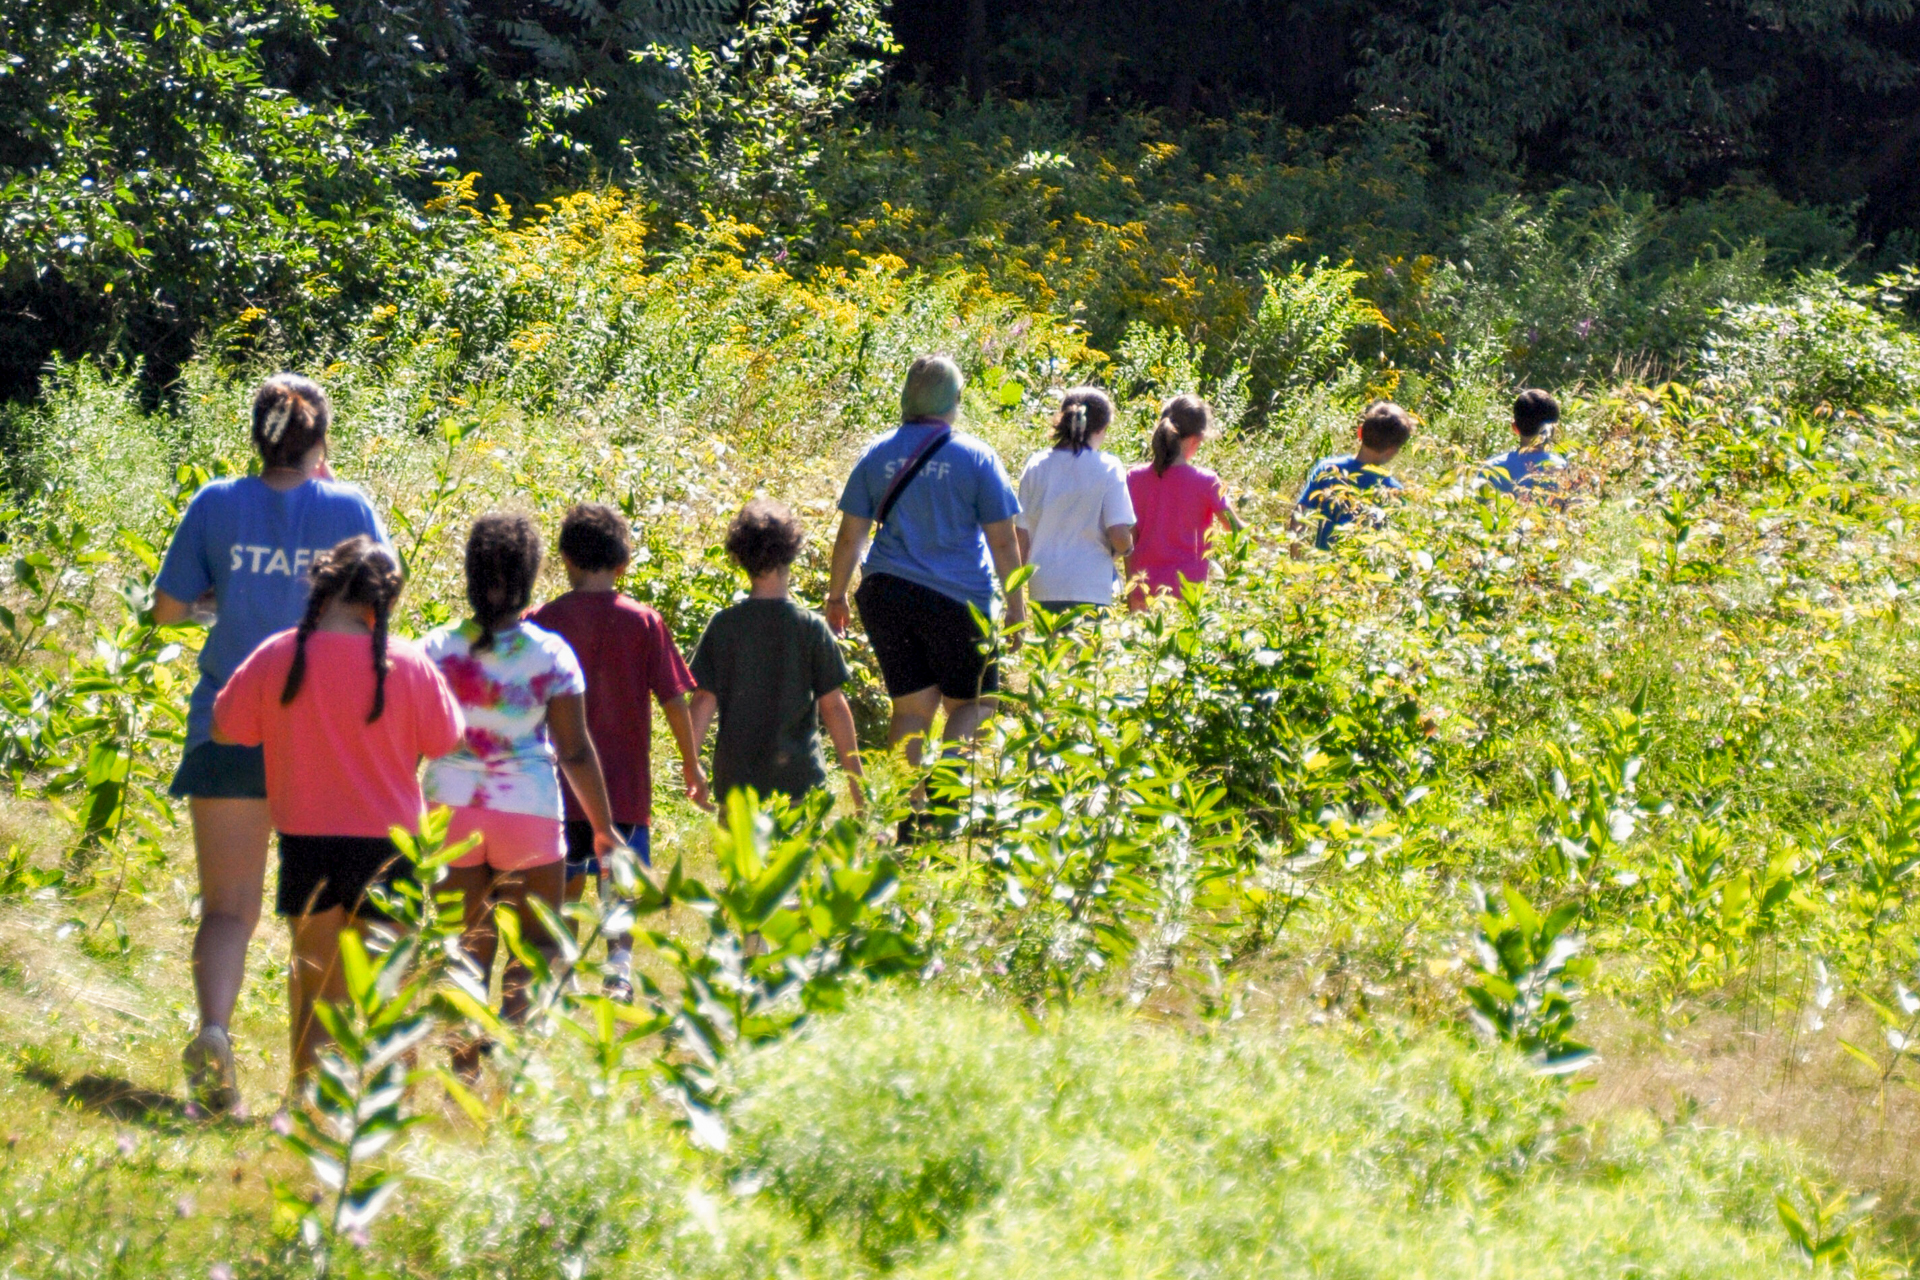 A group of campers at Wild At Art Nature Camp walking through a lush, green meadow with their counselors